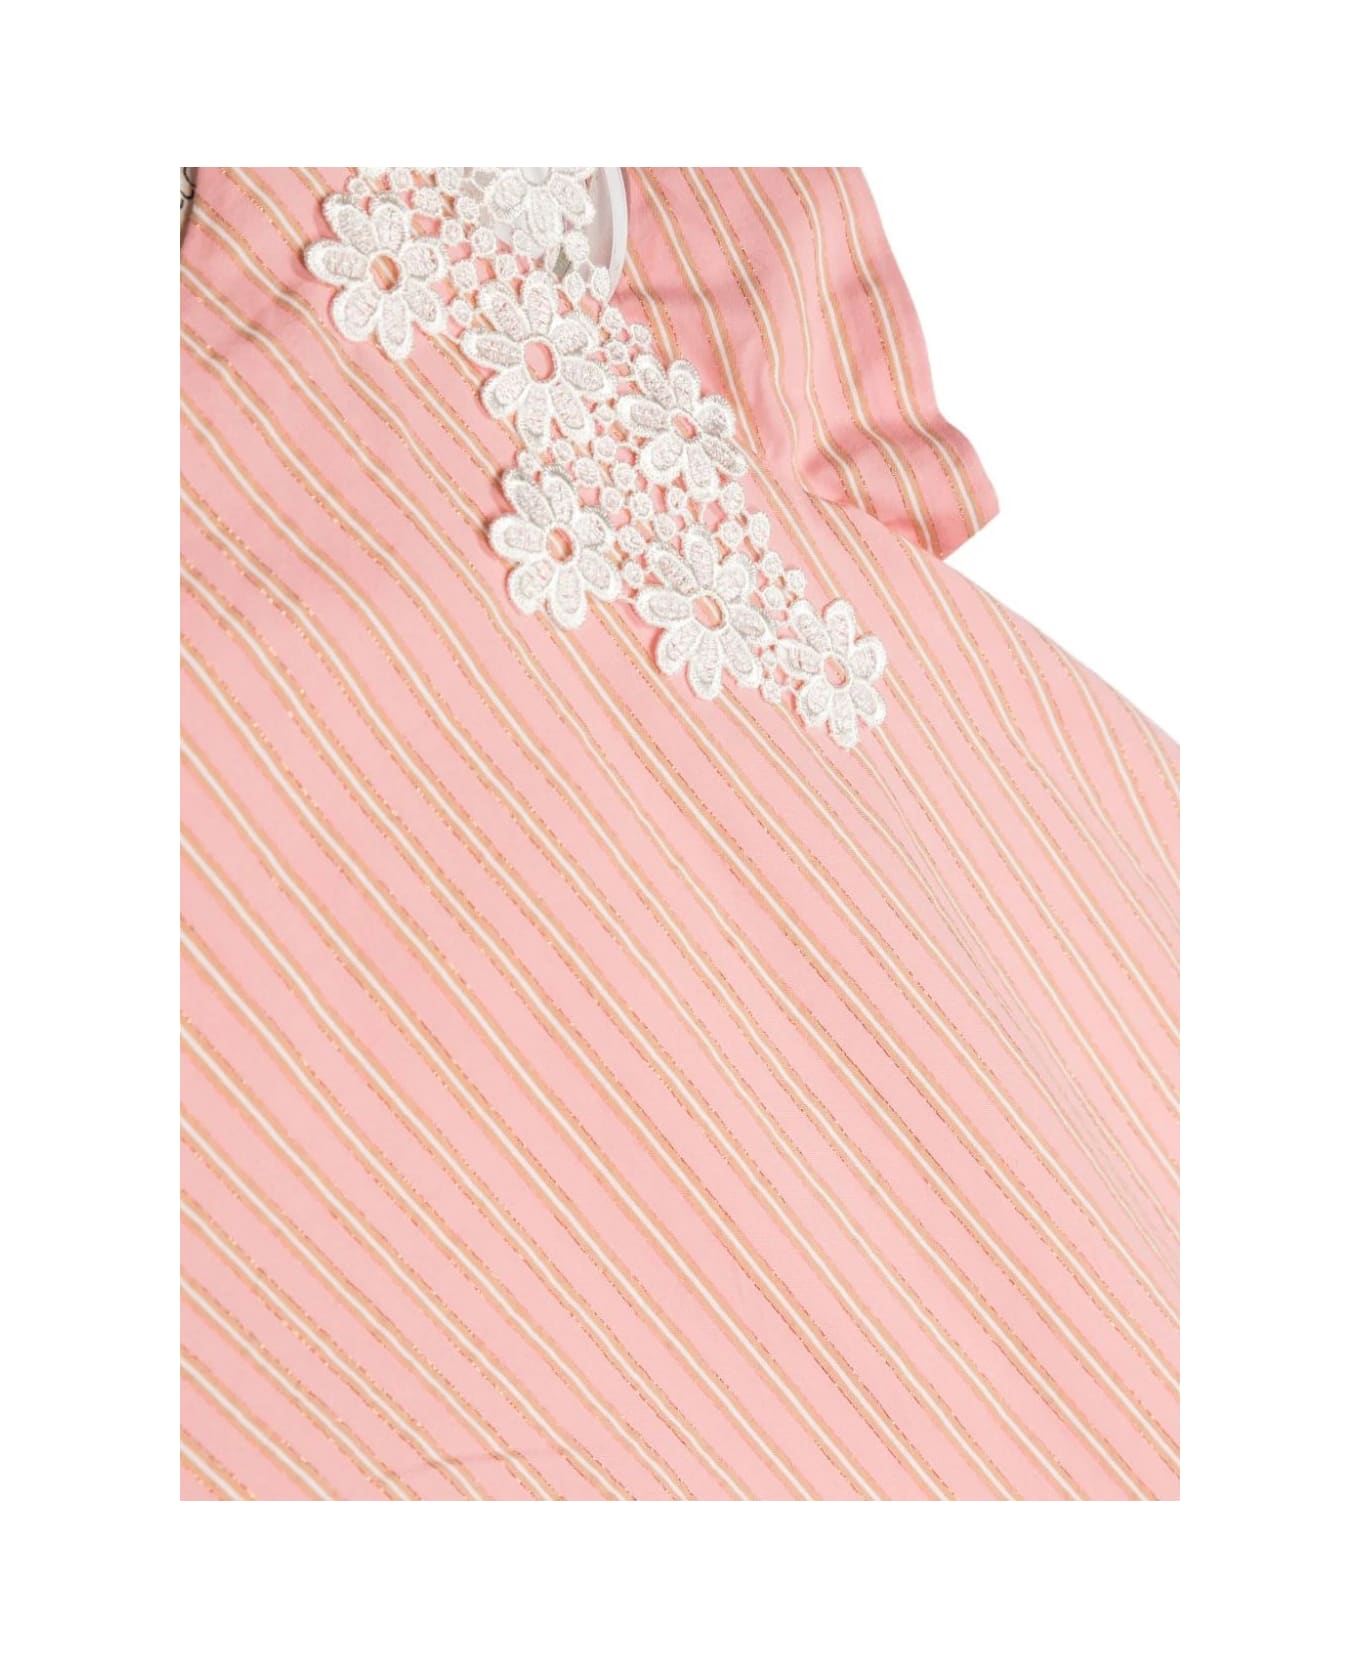 Simonetta Pink Lamé Striped Dress With Lace - Pink